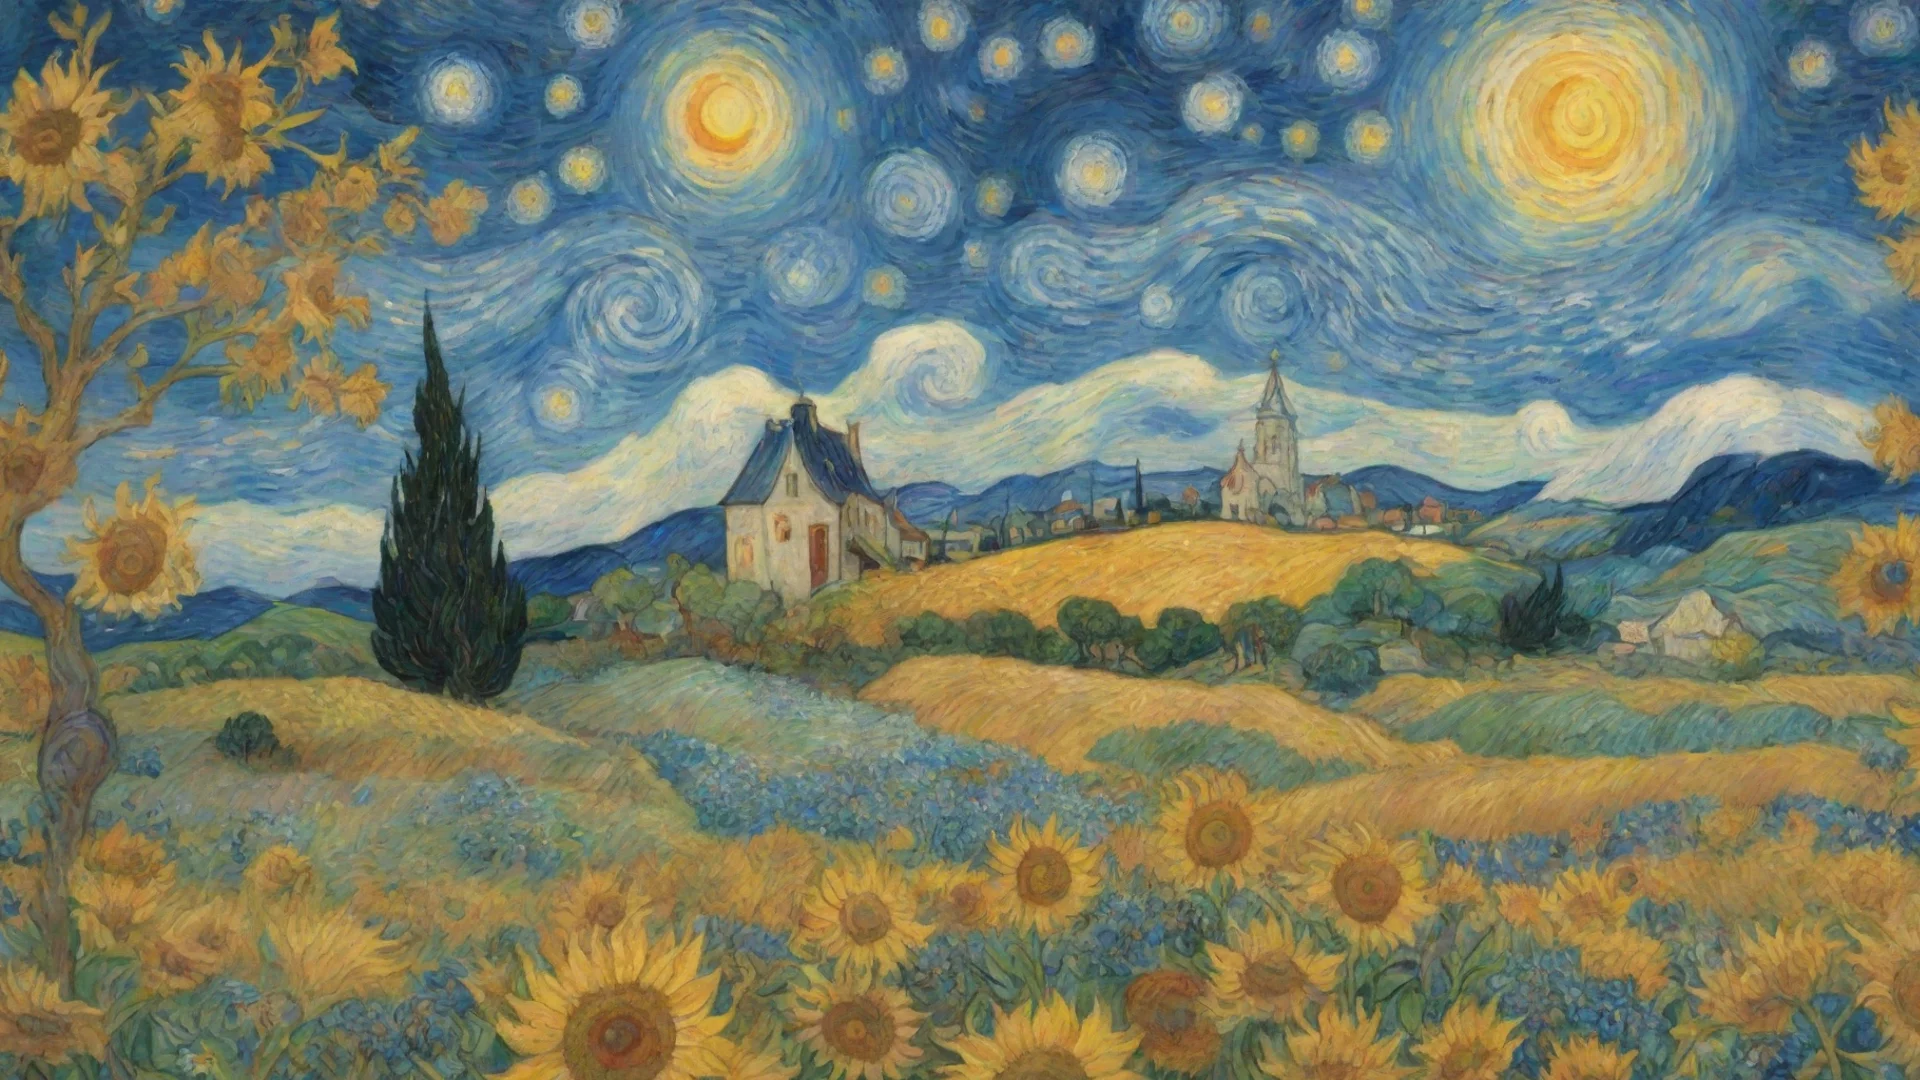 aiamazing epic lovely artistic ghibli van gogh happyness bliss peace  detailed asthetic awesome portrait 2 wide